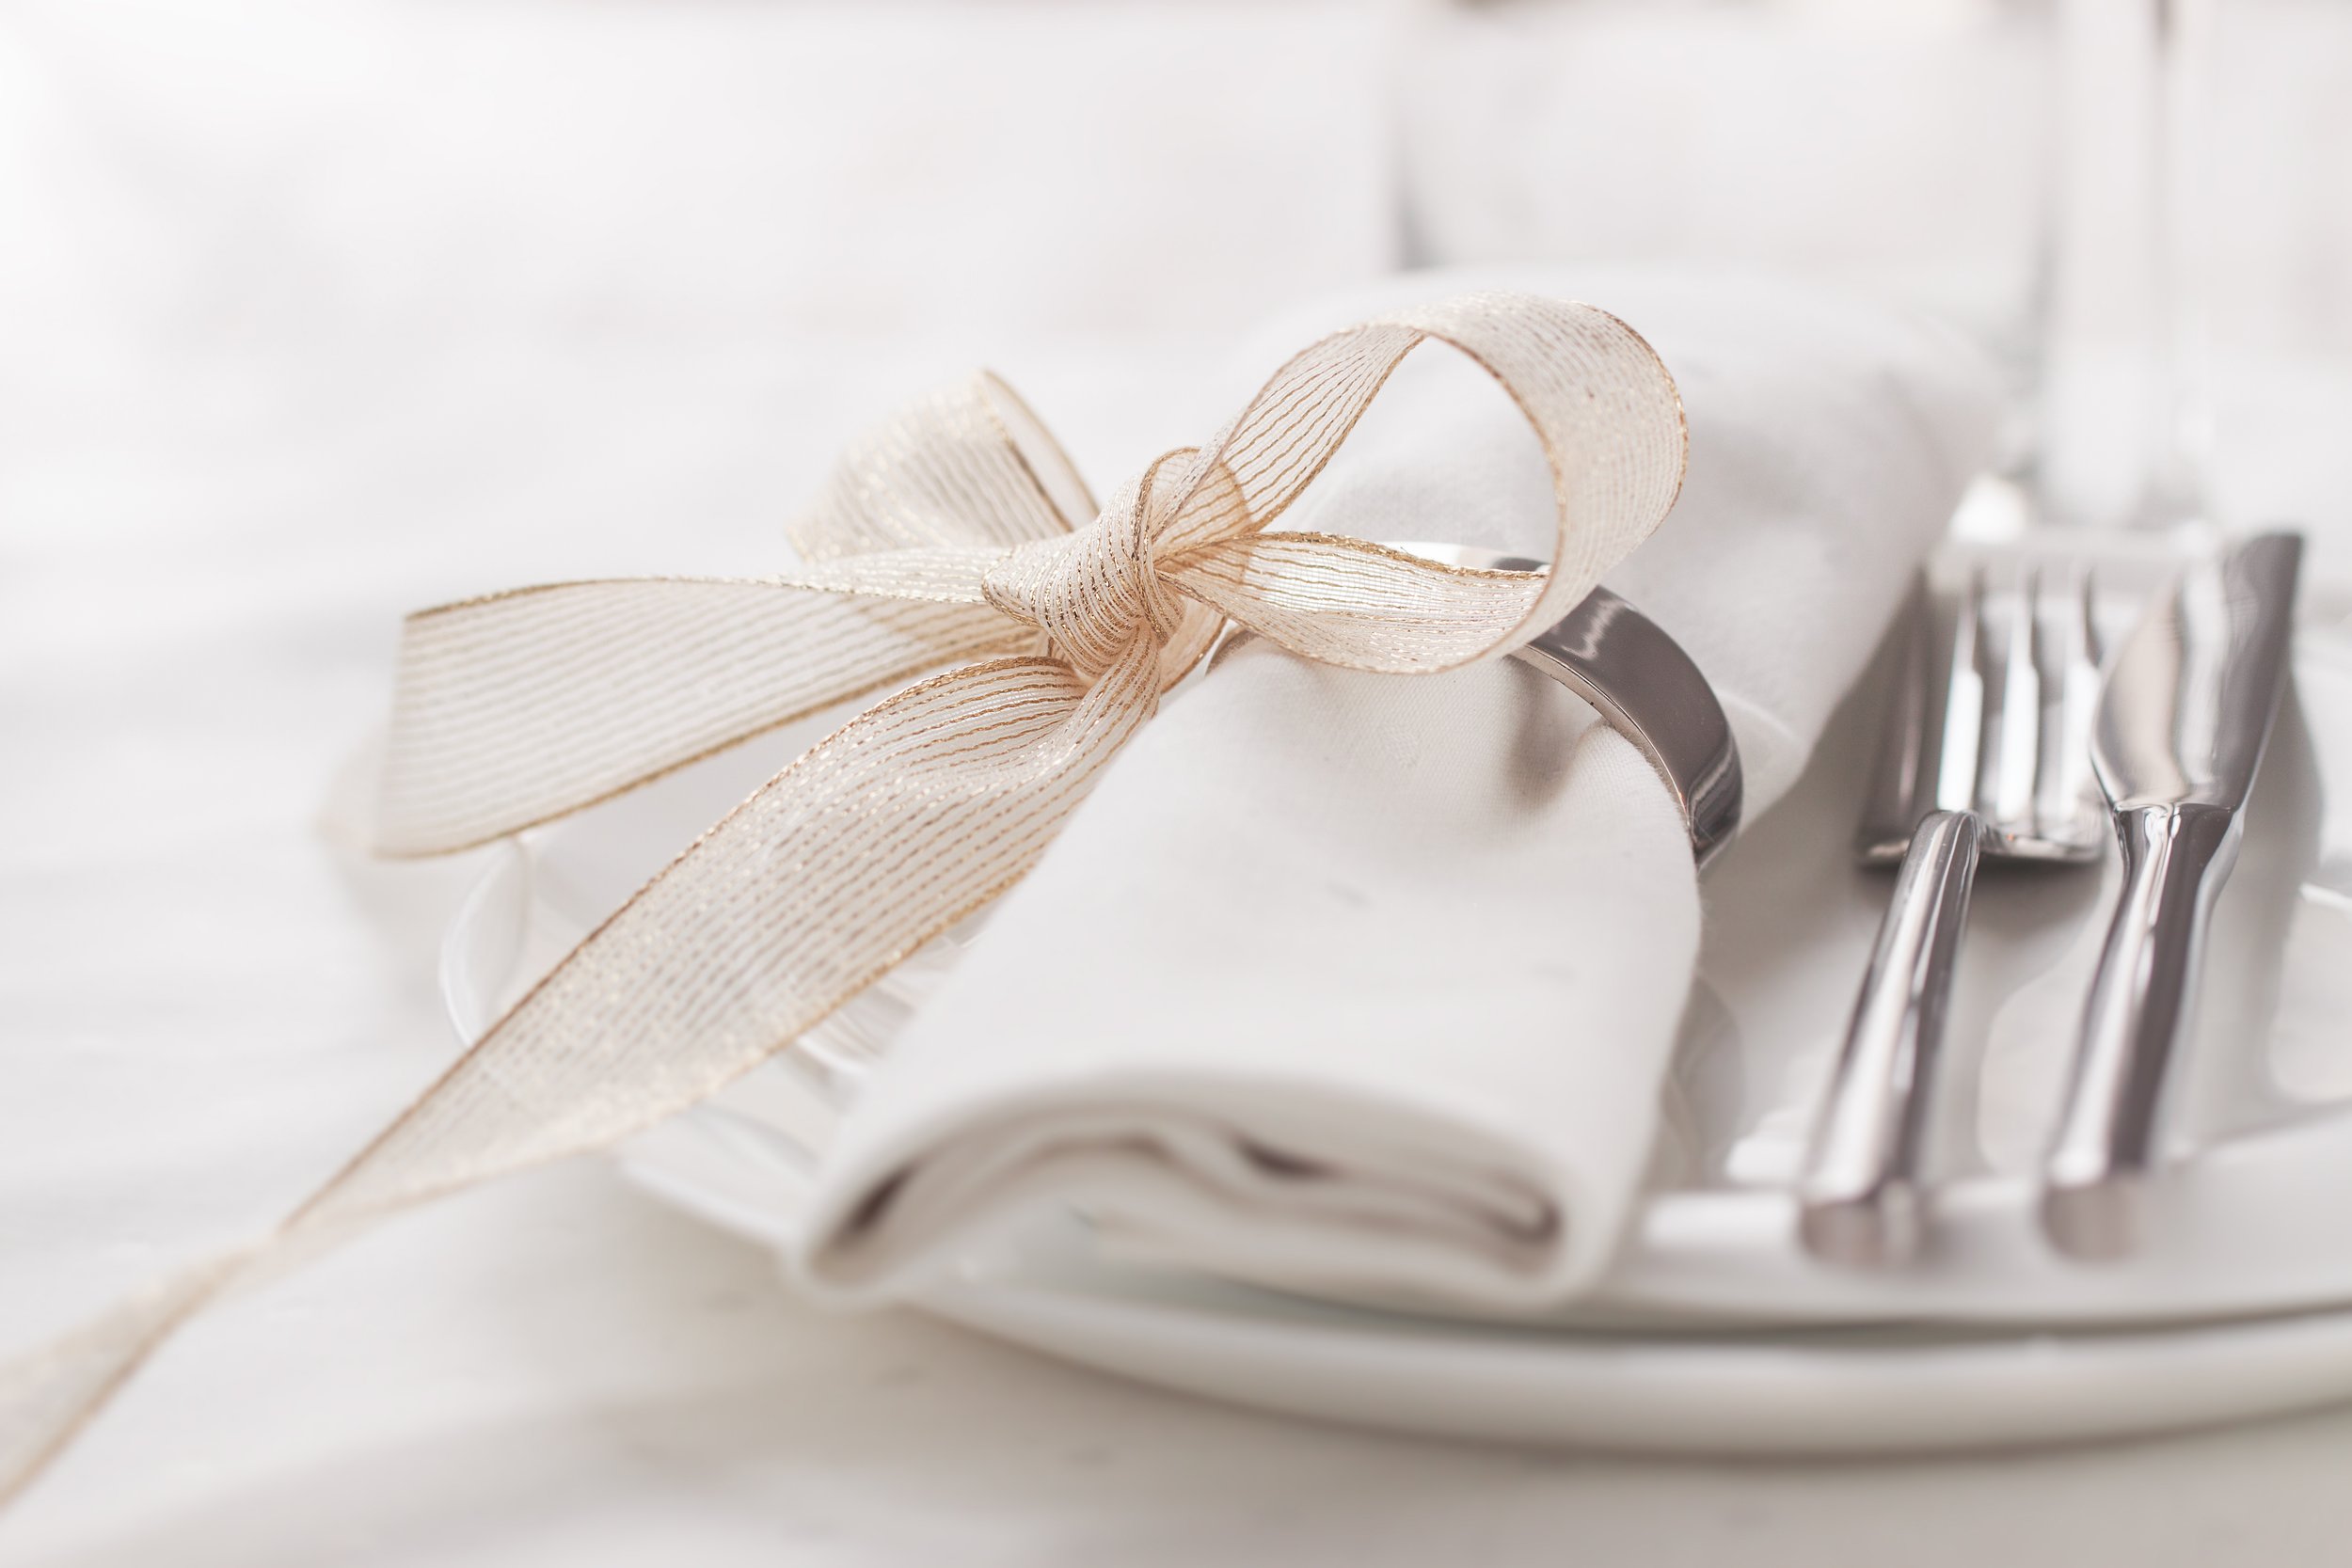 dish-with-cutlery-napkin-with-bow.jpg